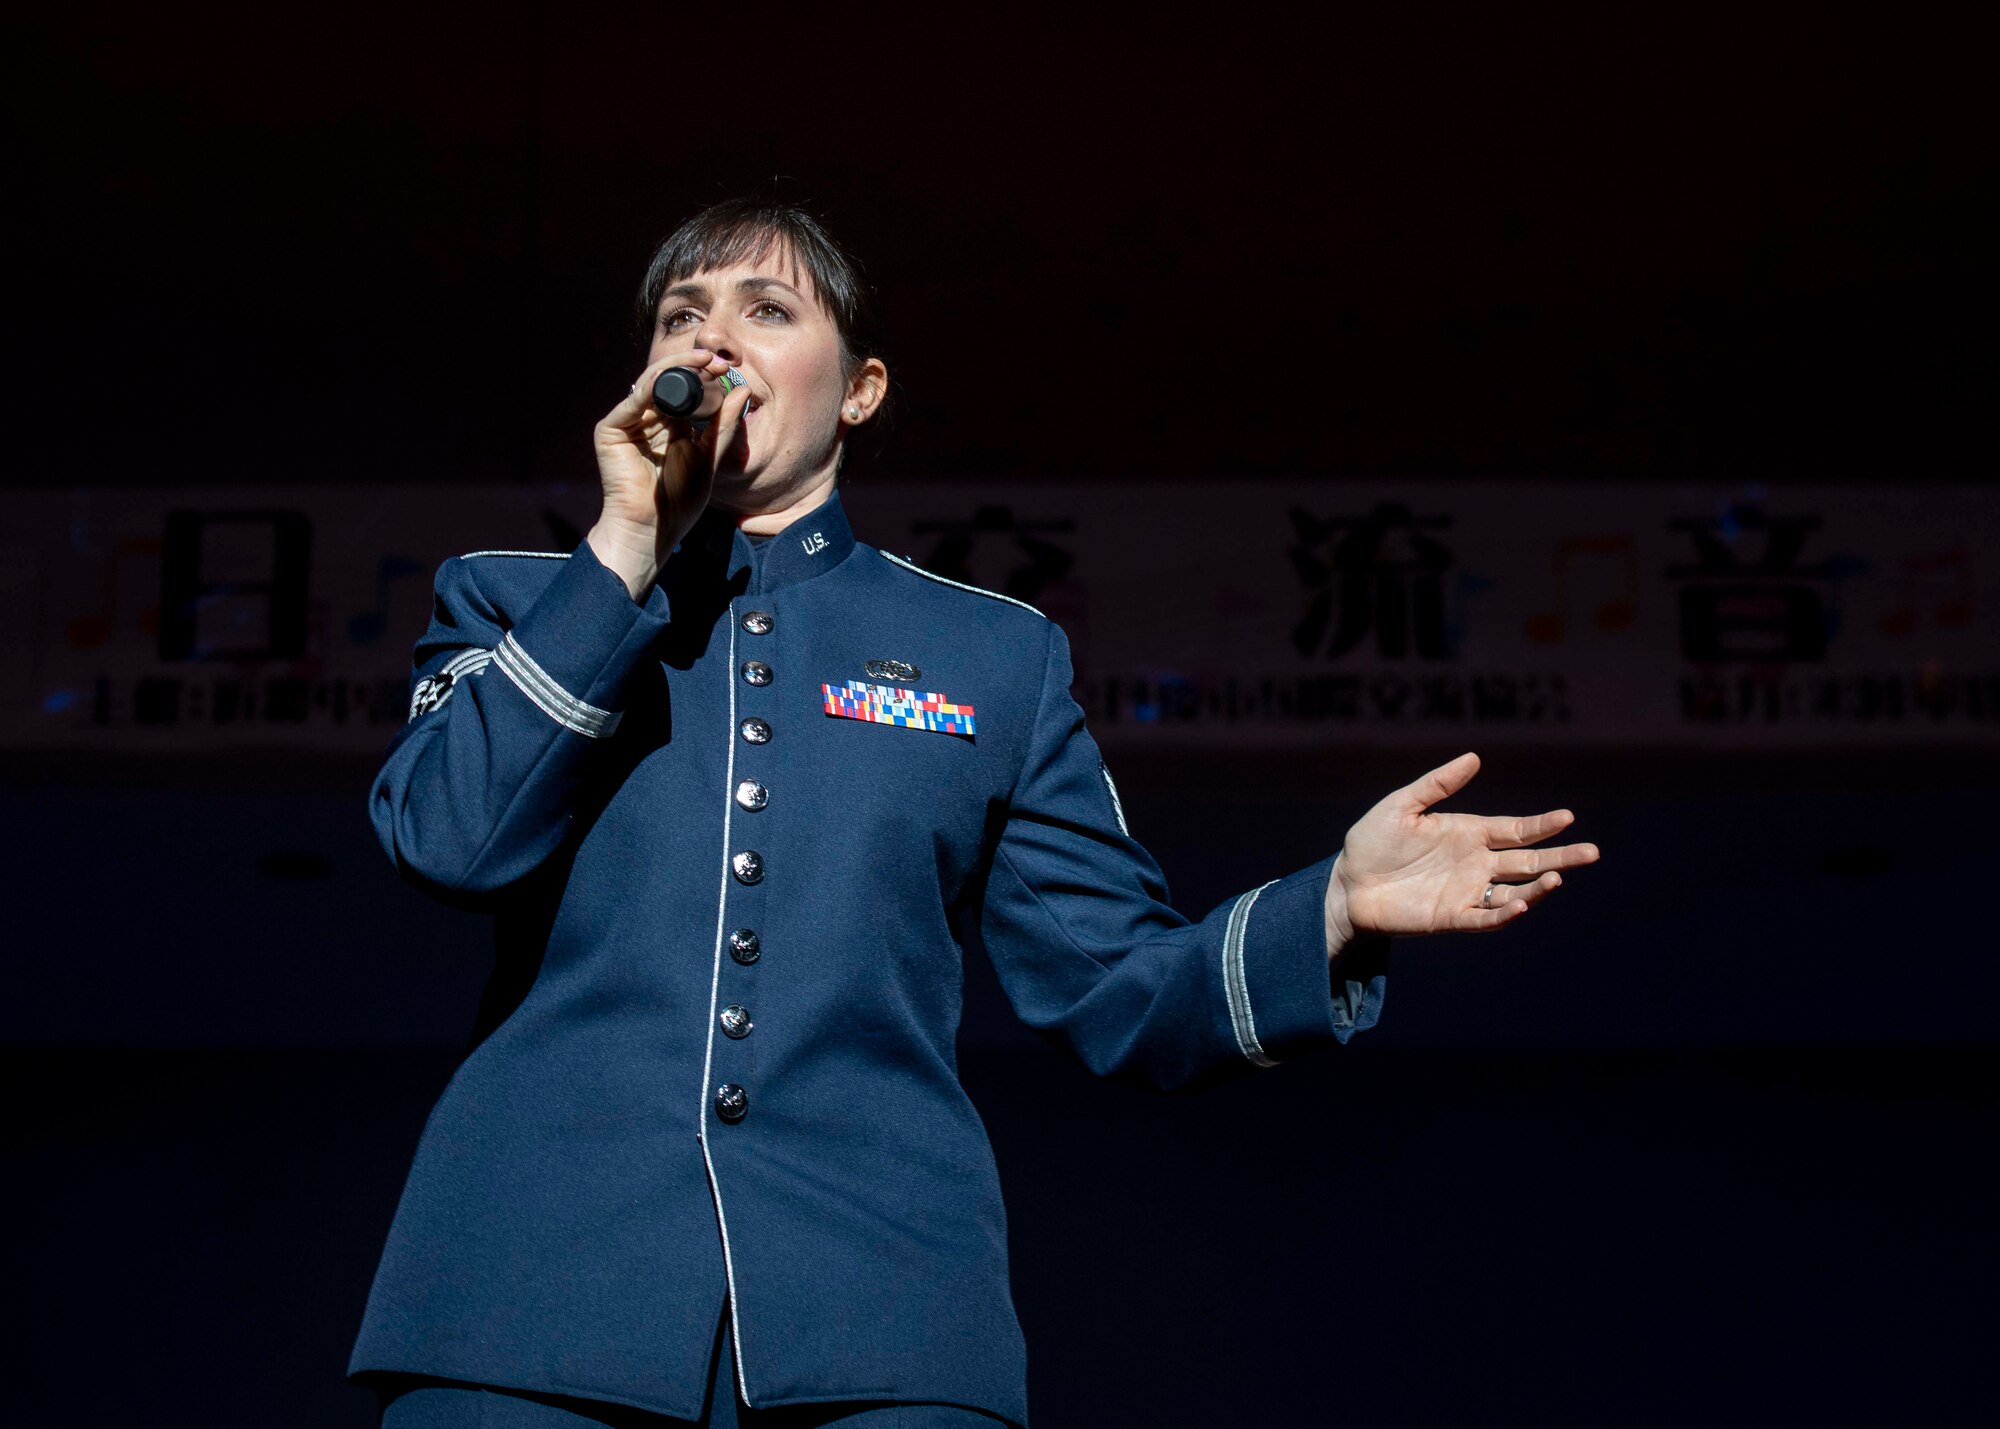 PACAF Band spreads joy of music